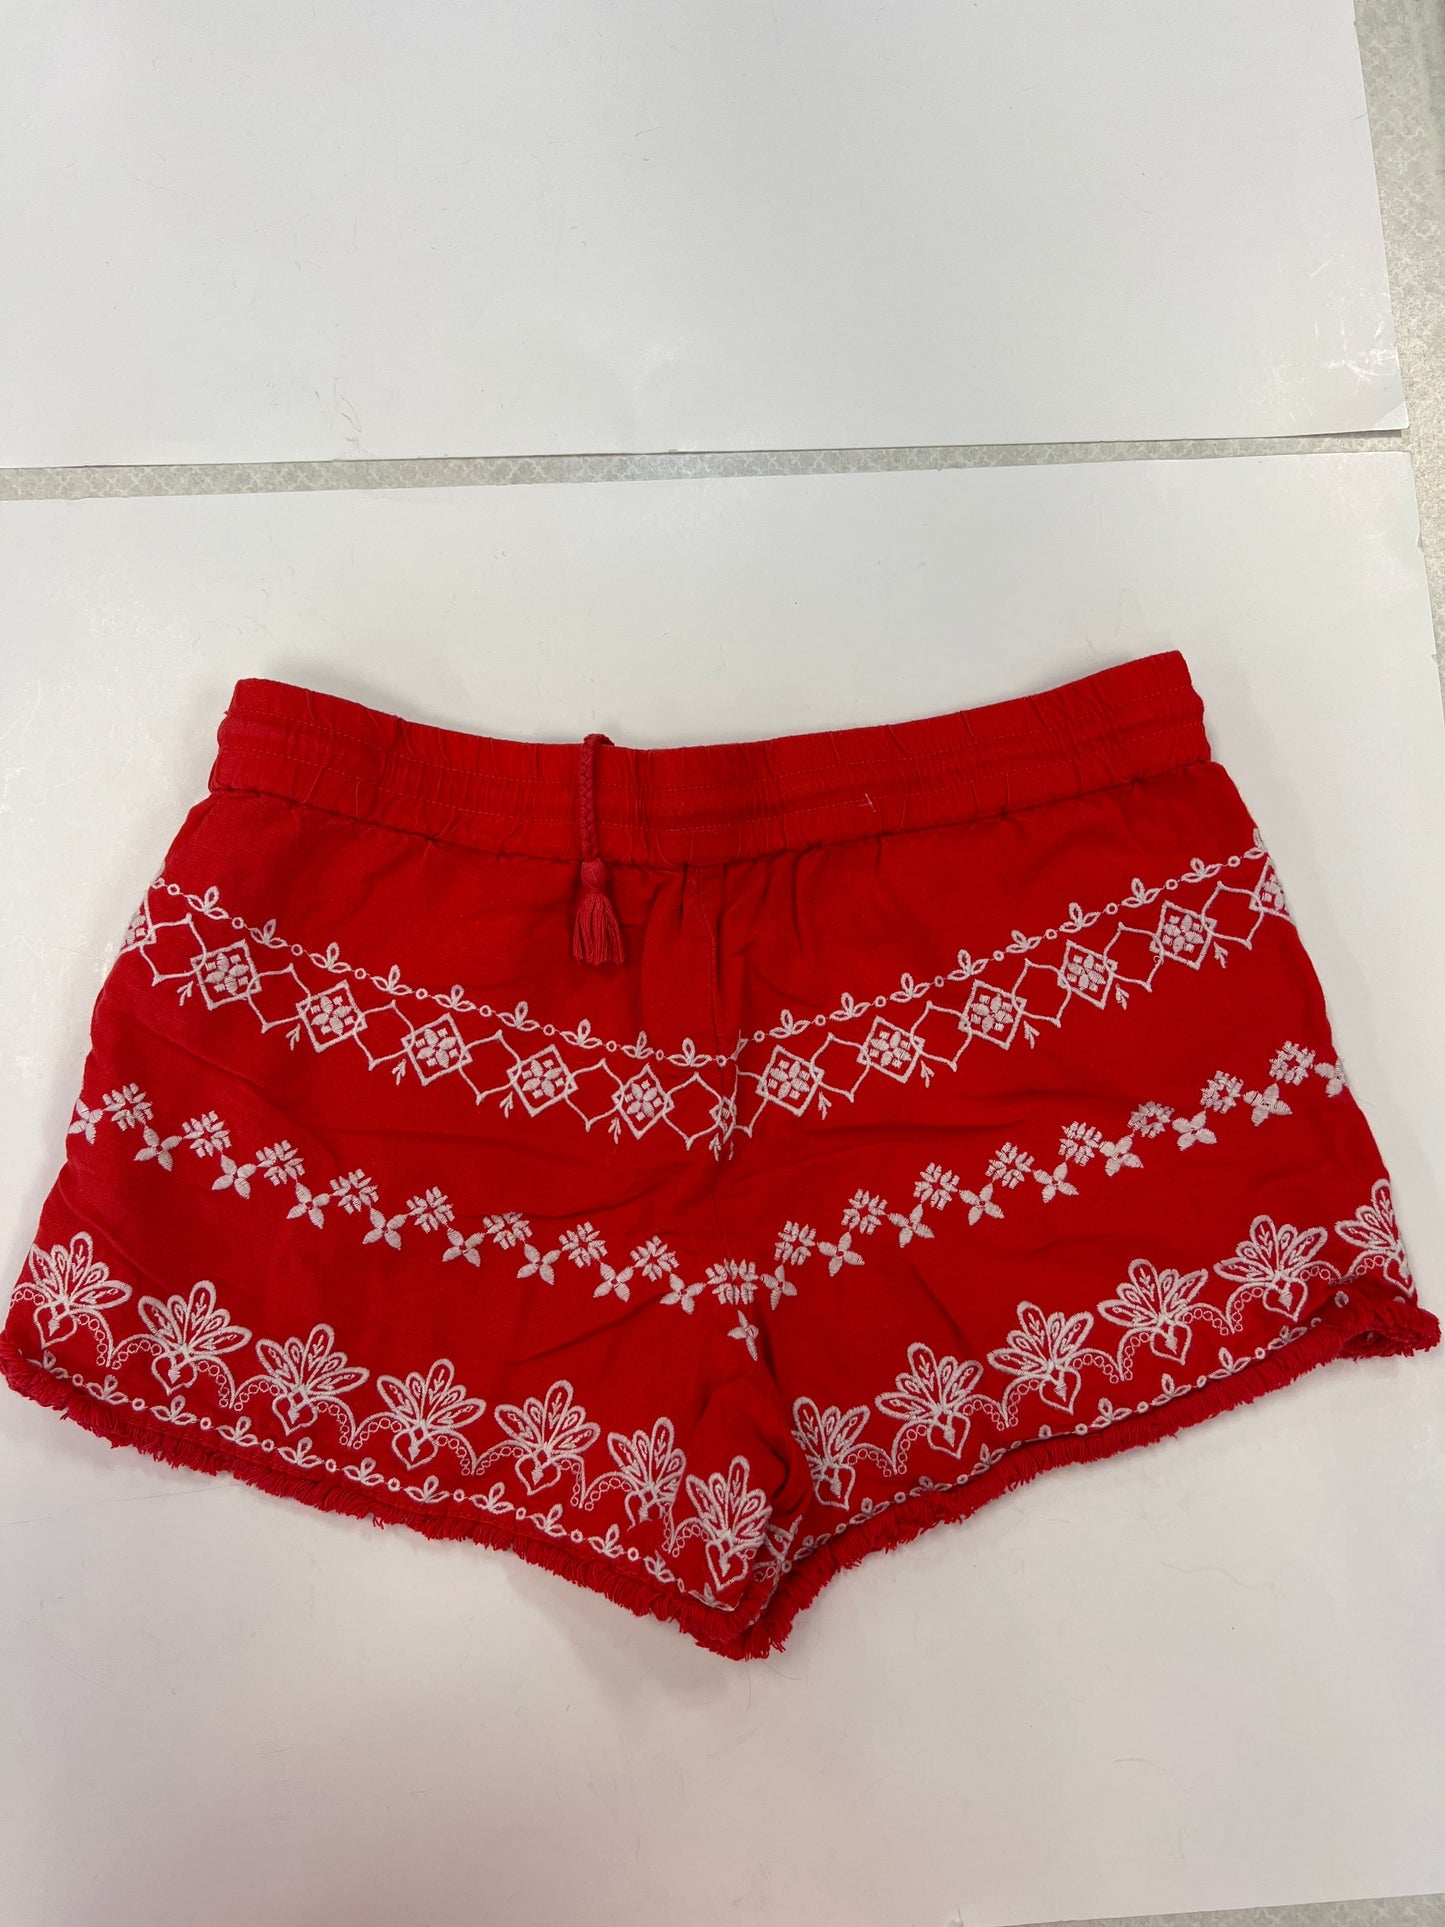 Red Shorts Loft, Size S